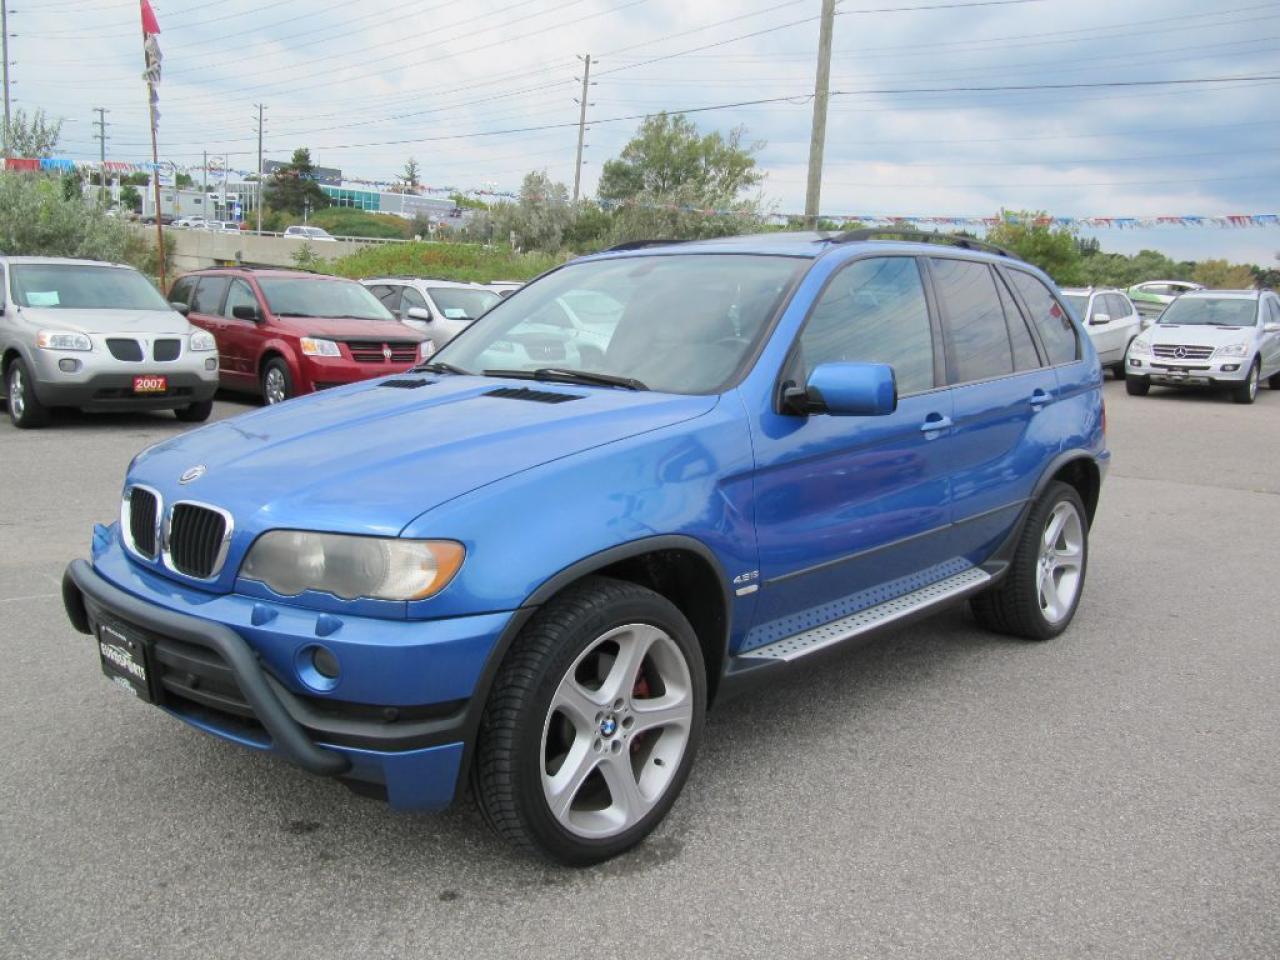 Used 2003 BMW X5 4.6 IS for Sale in Newmarket, Ontario | Carpages.ca1024 x 768